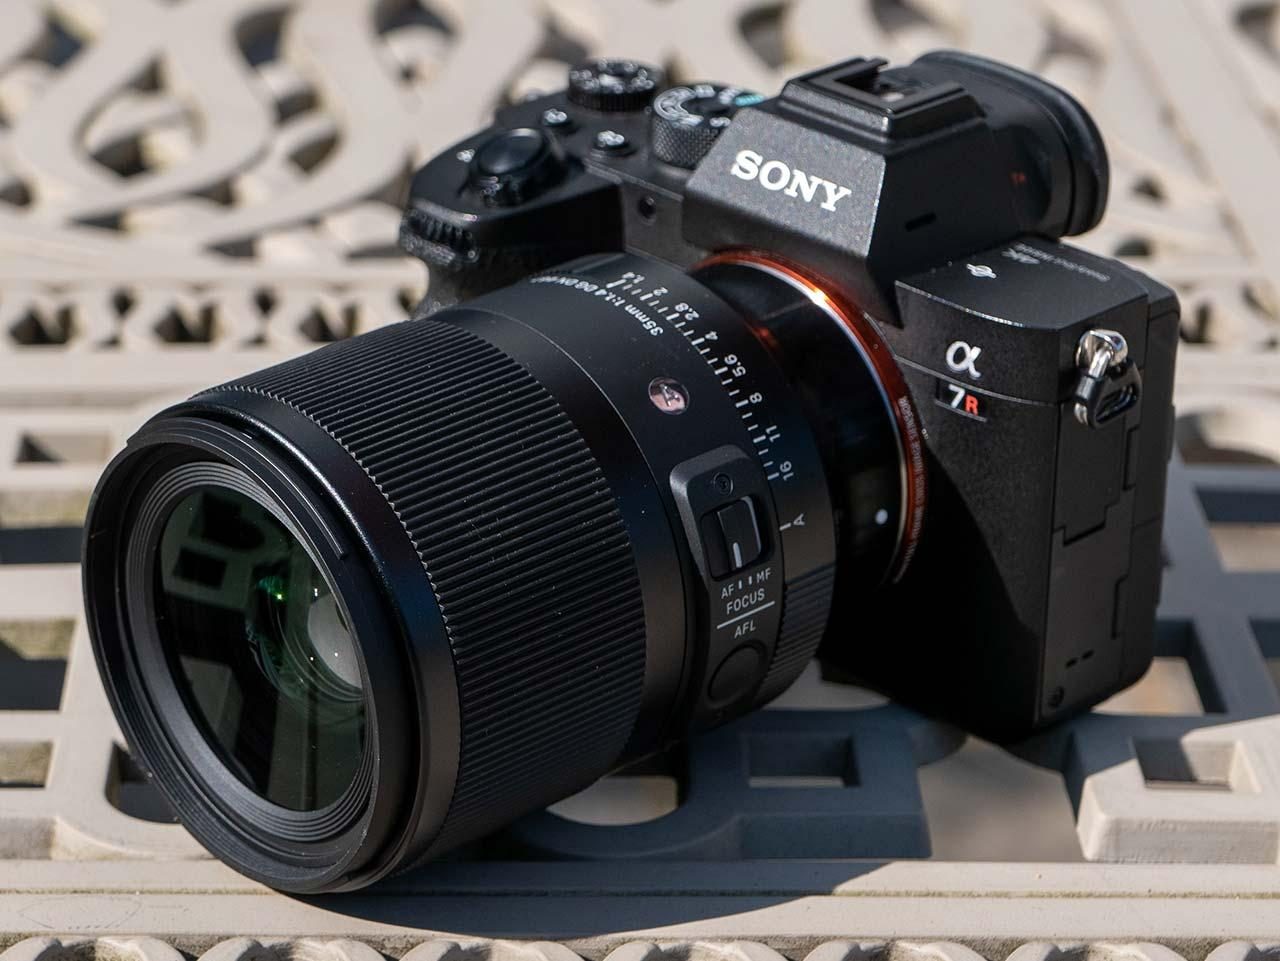 Sigma 35mm F1.4 DG DN Review - Review Roundup | Photography Blog